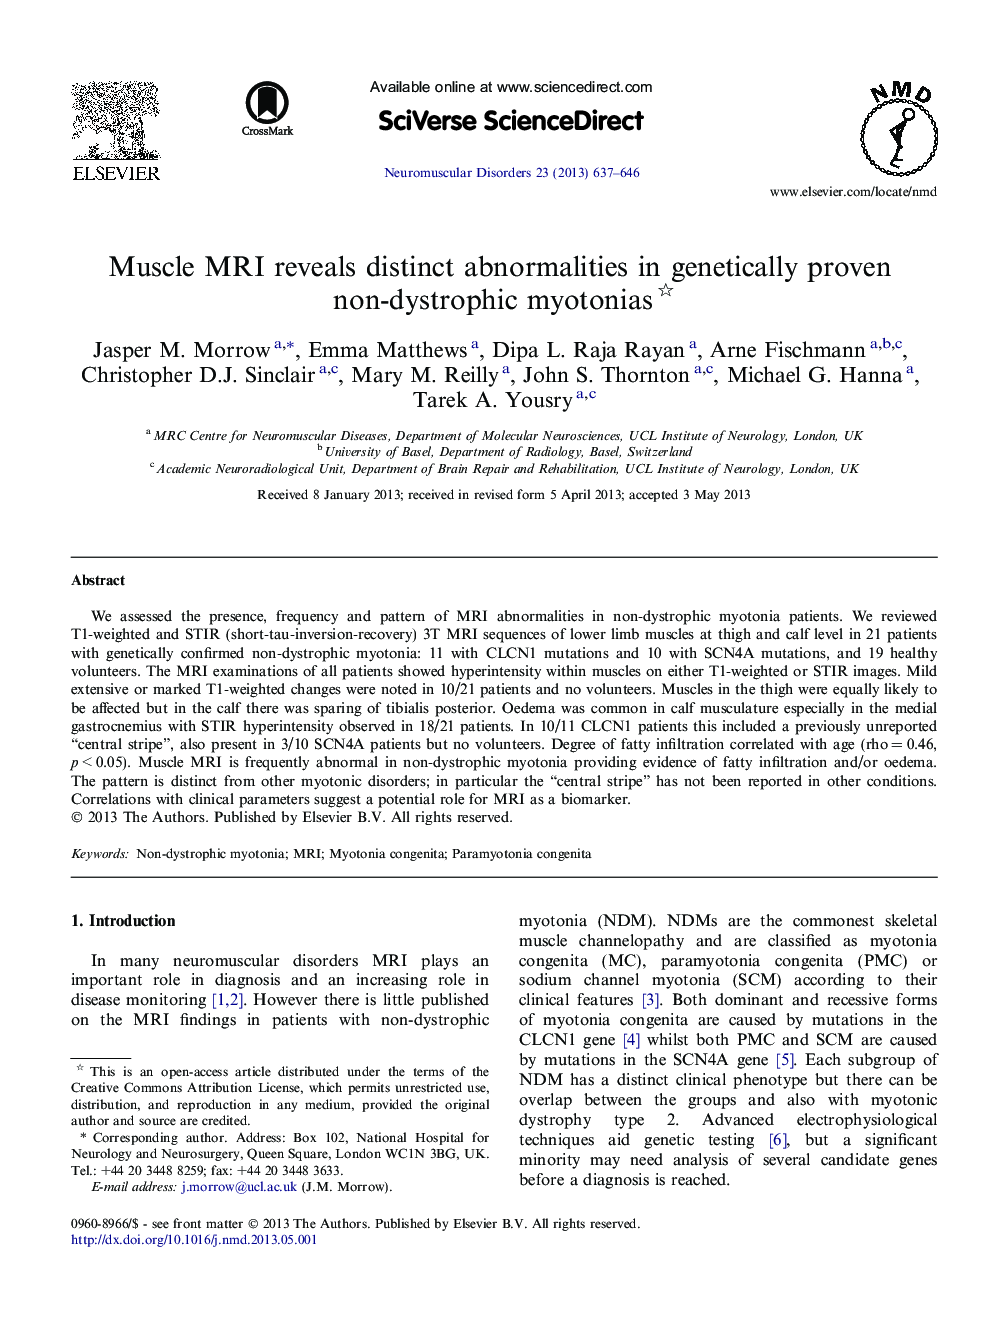 Muscle MRI reveals distinct abnormalities in genetically proven non-dystrophic myotonias